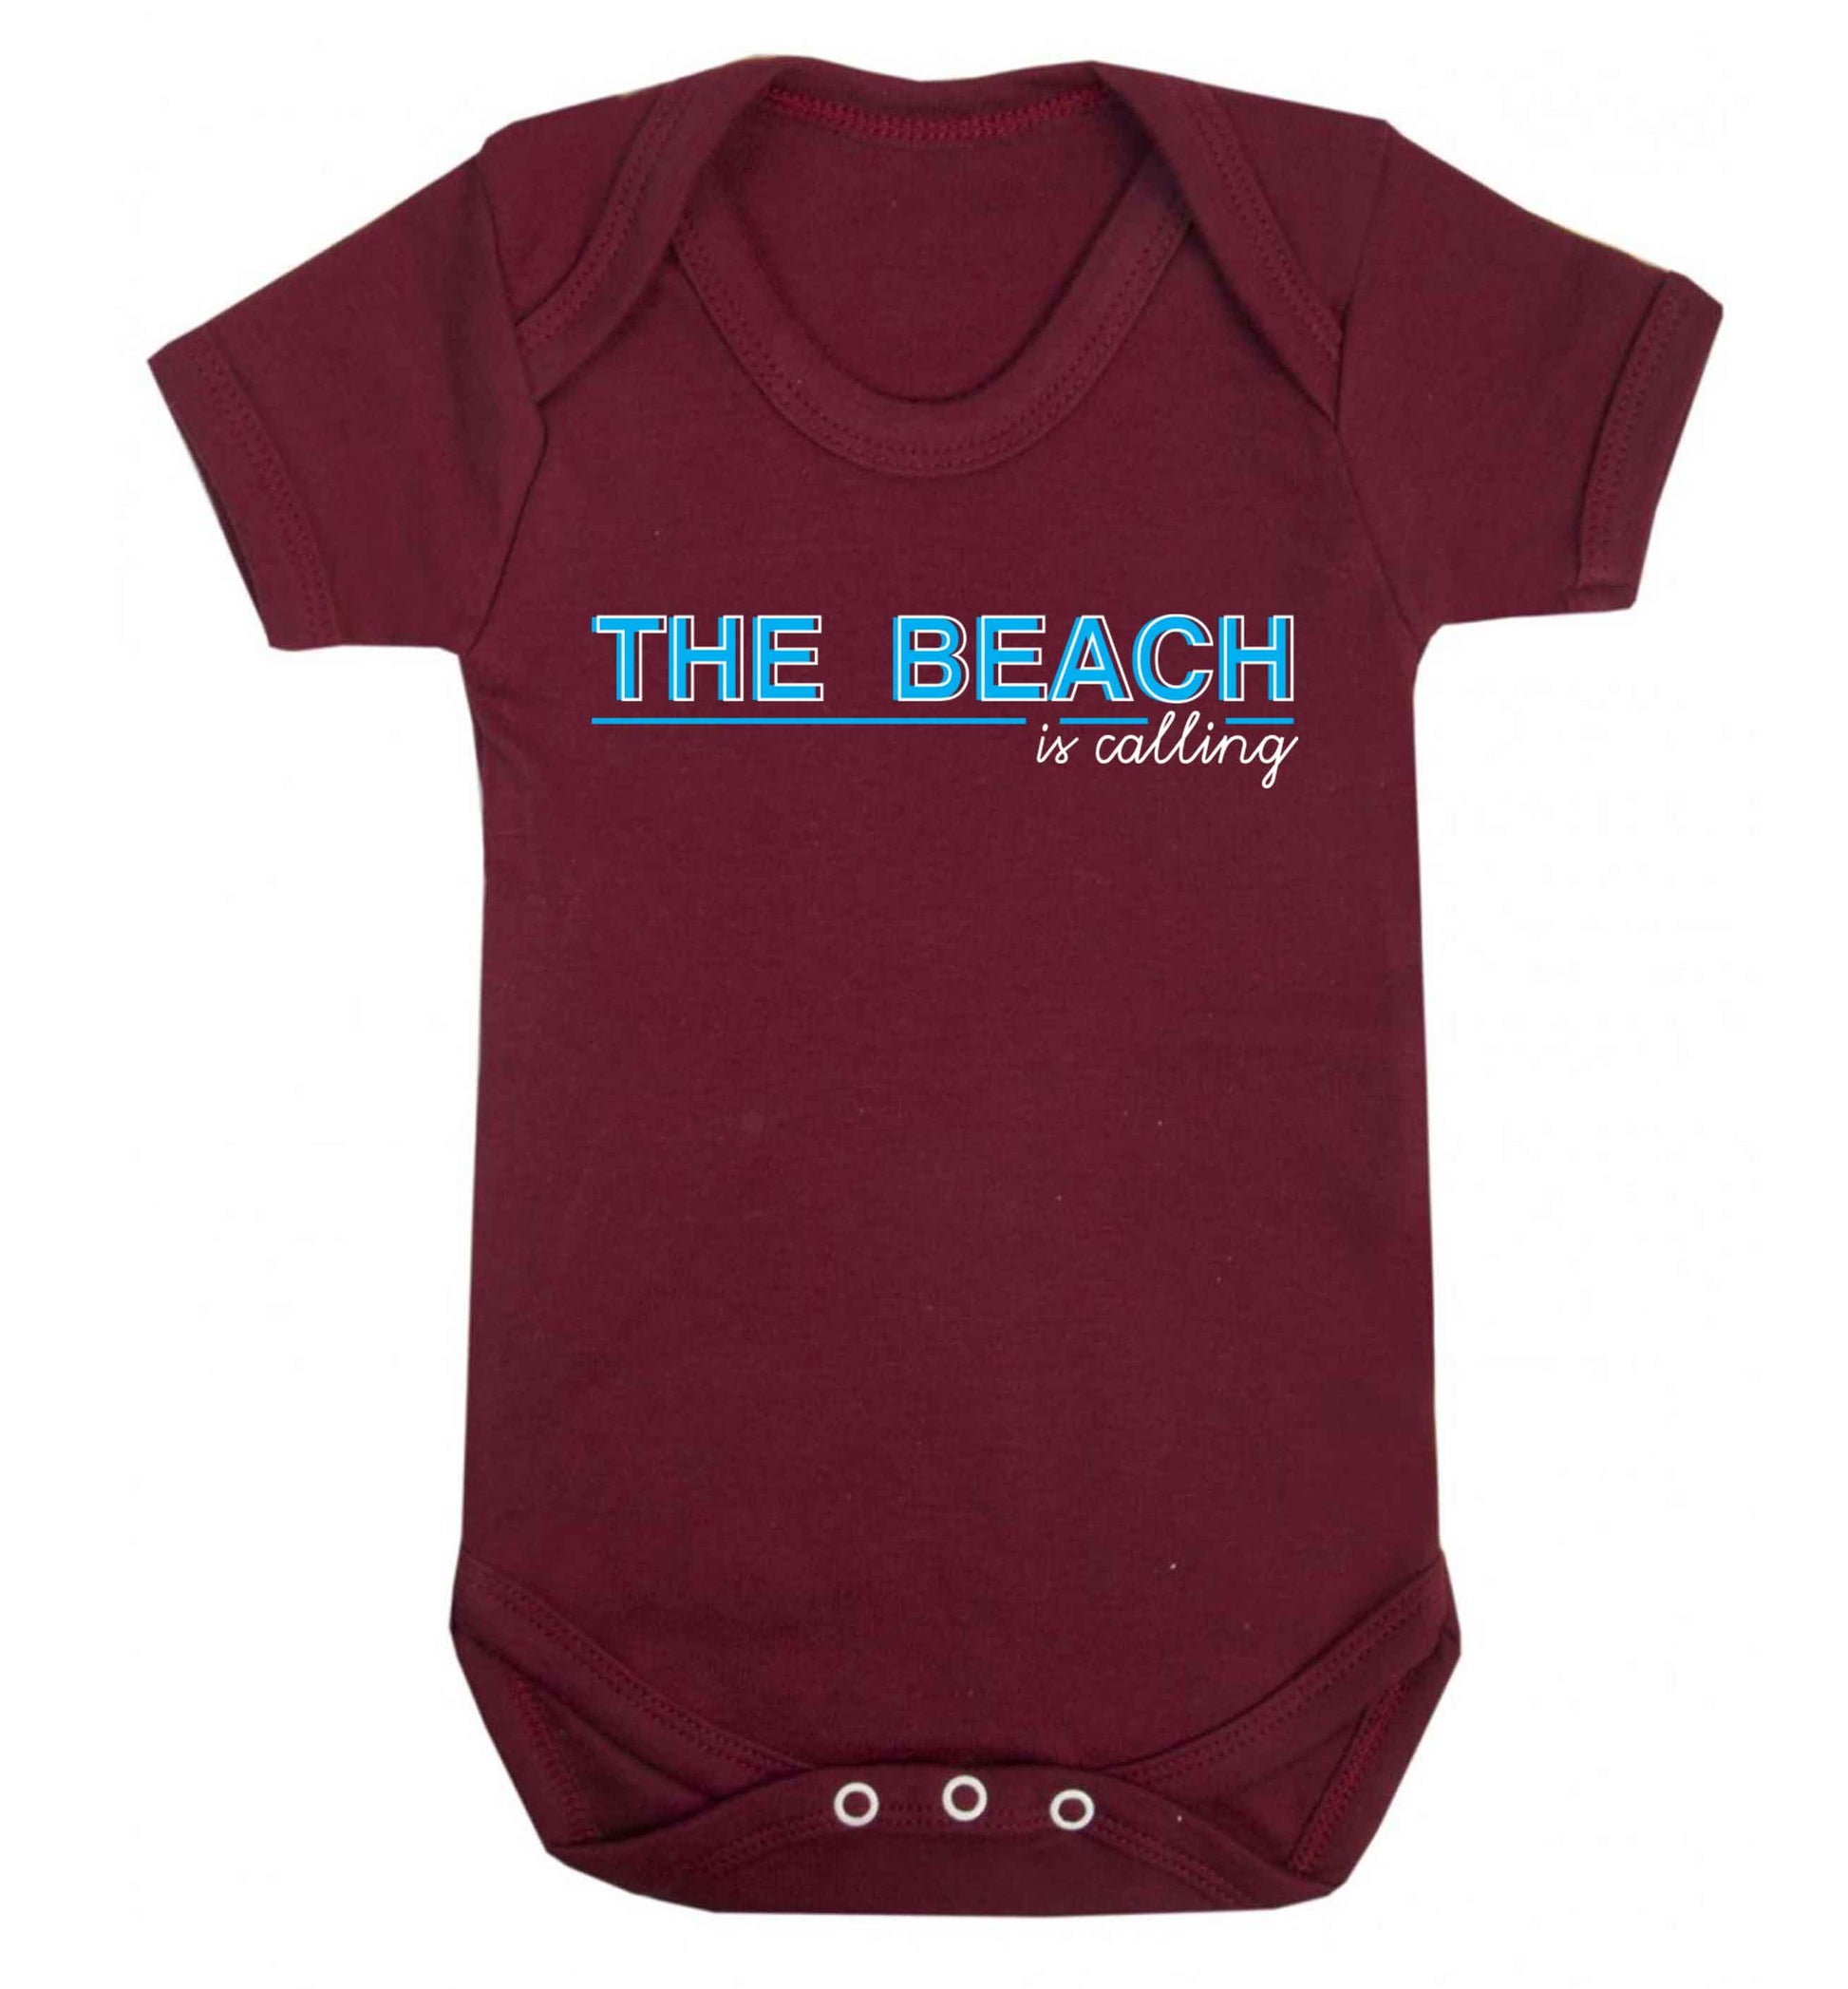 The beach is calling Baby Vest maroon 18-24 months